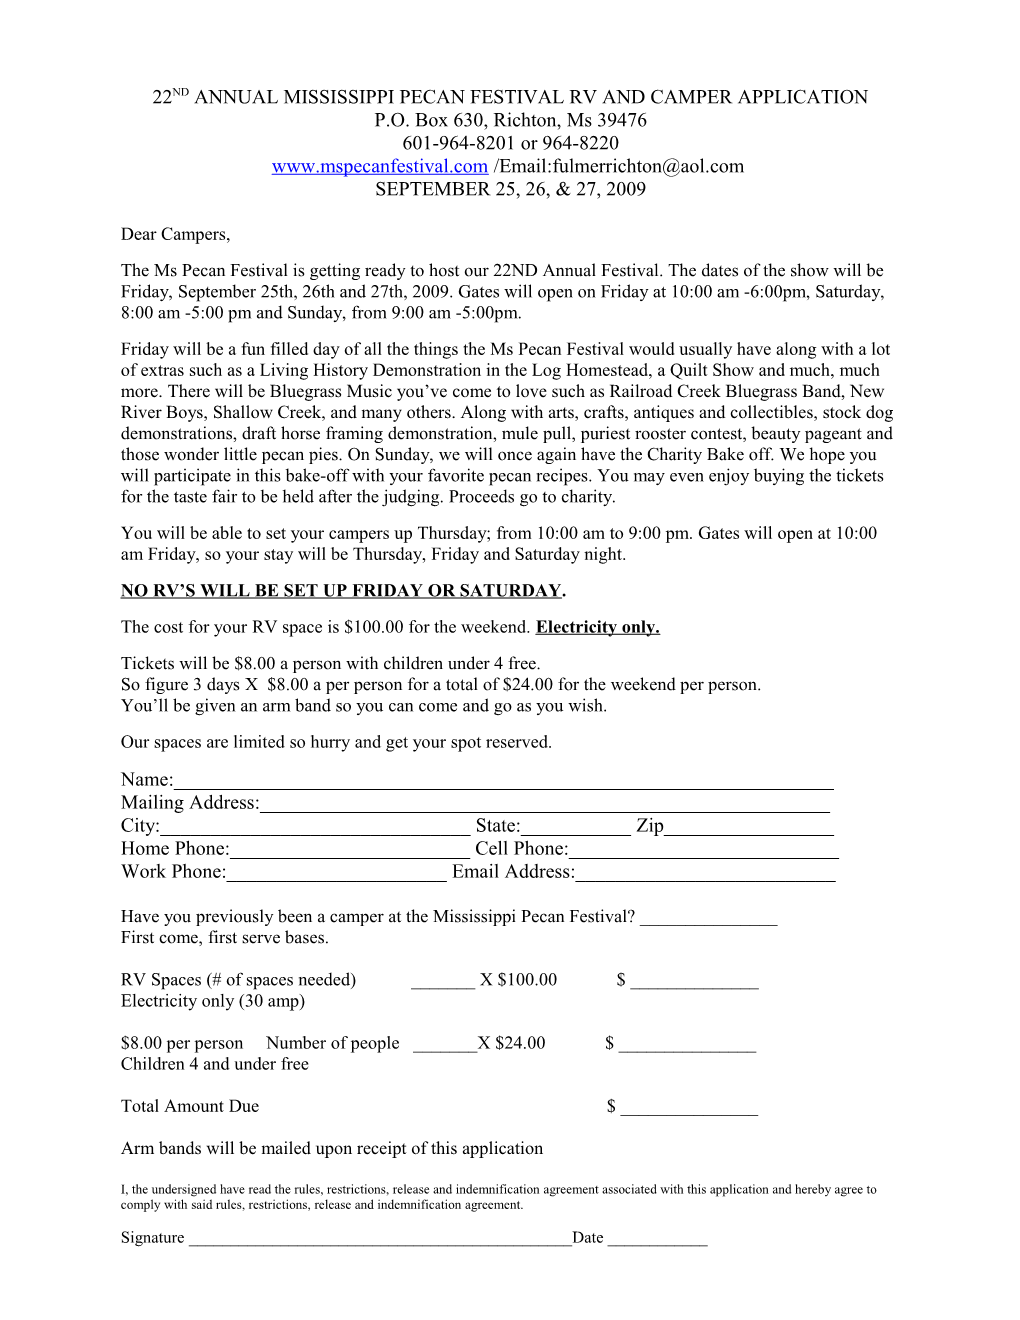 20Th Annual Mississippi Pecan Festival Rv and Camper Application